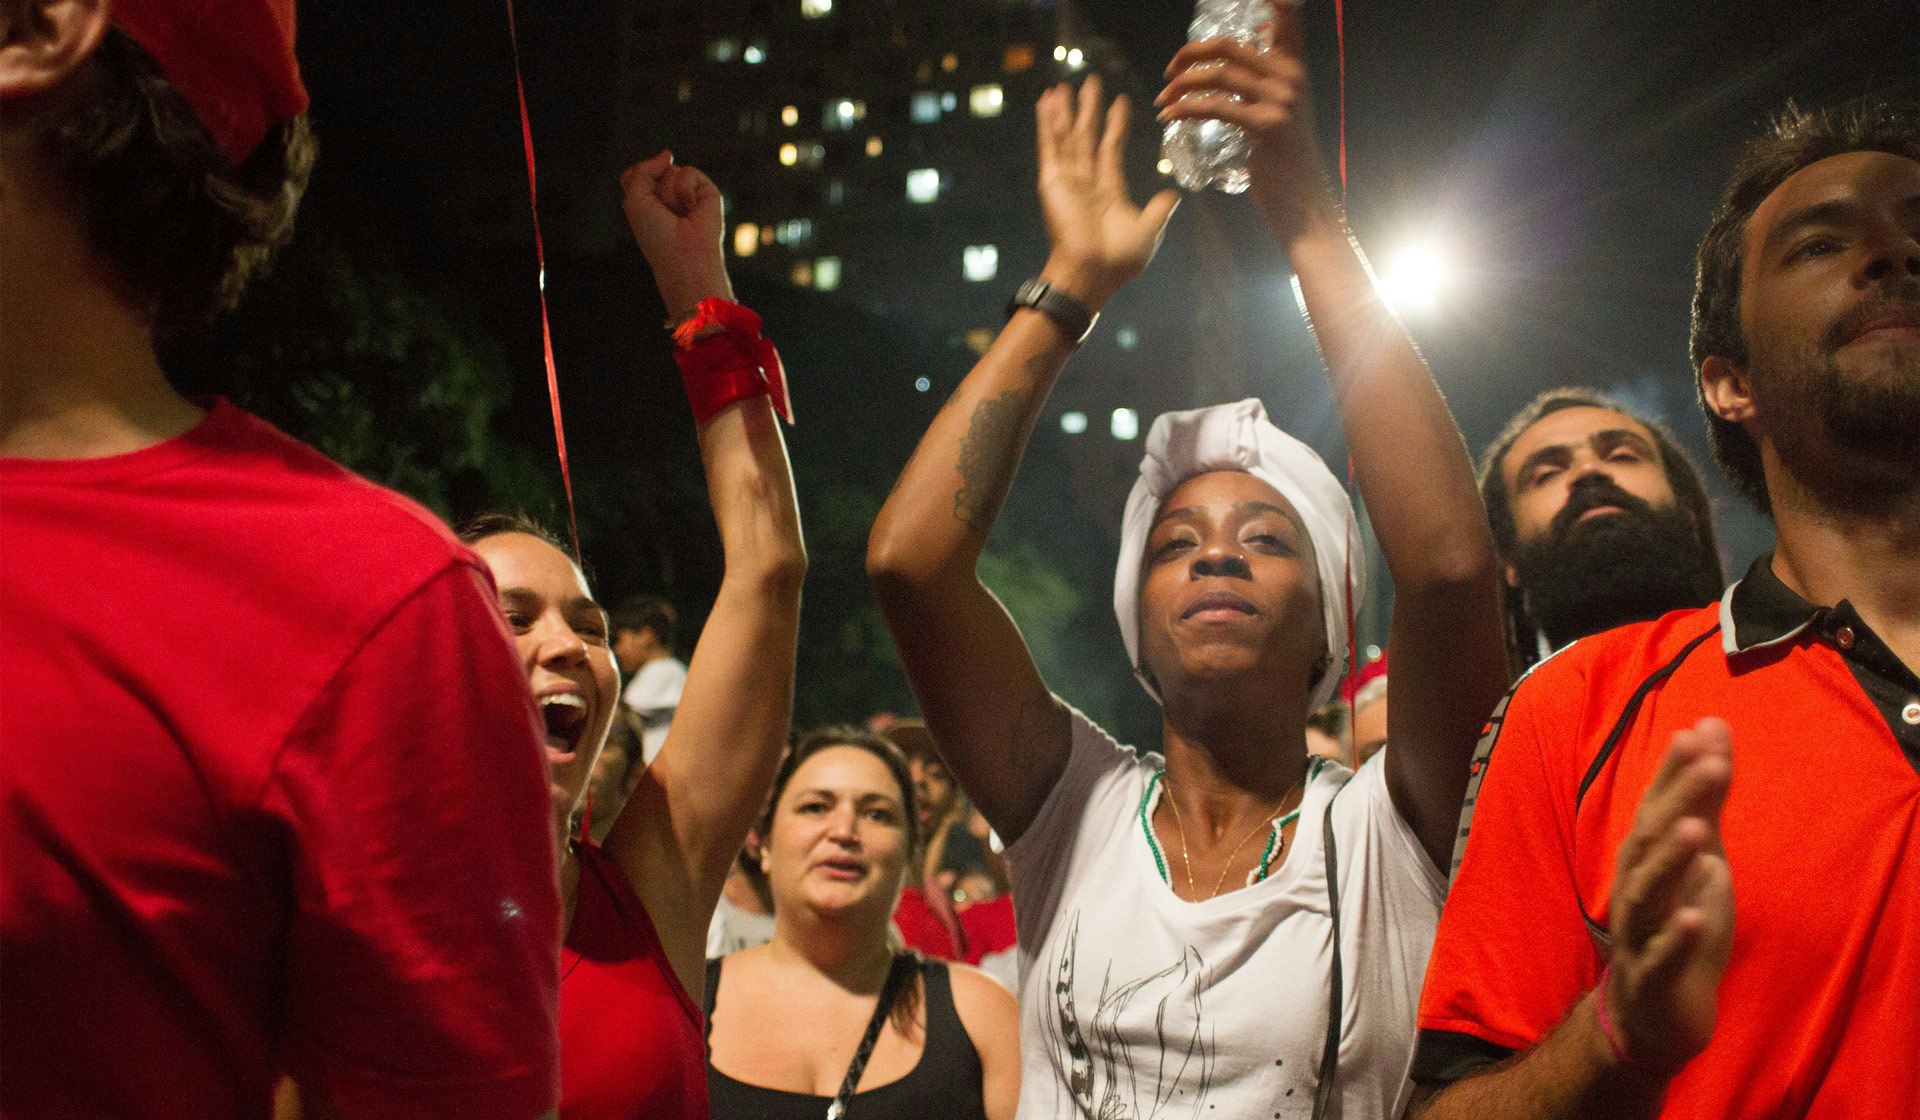 Facing a coup, protests erupt in support of Brazilian democracy